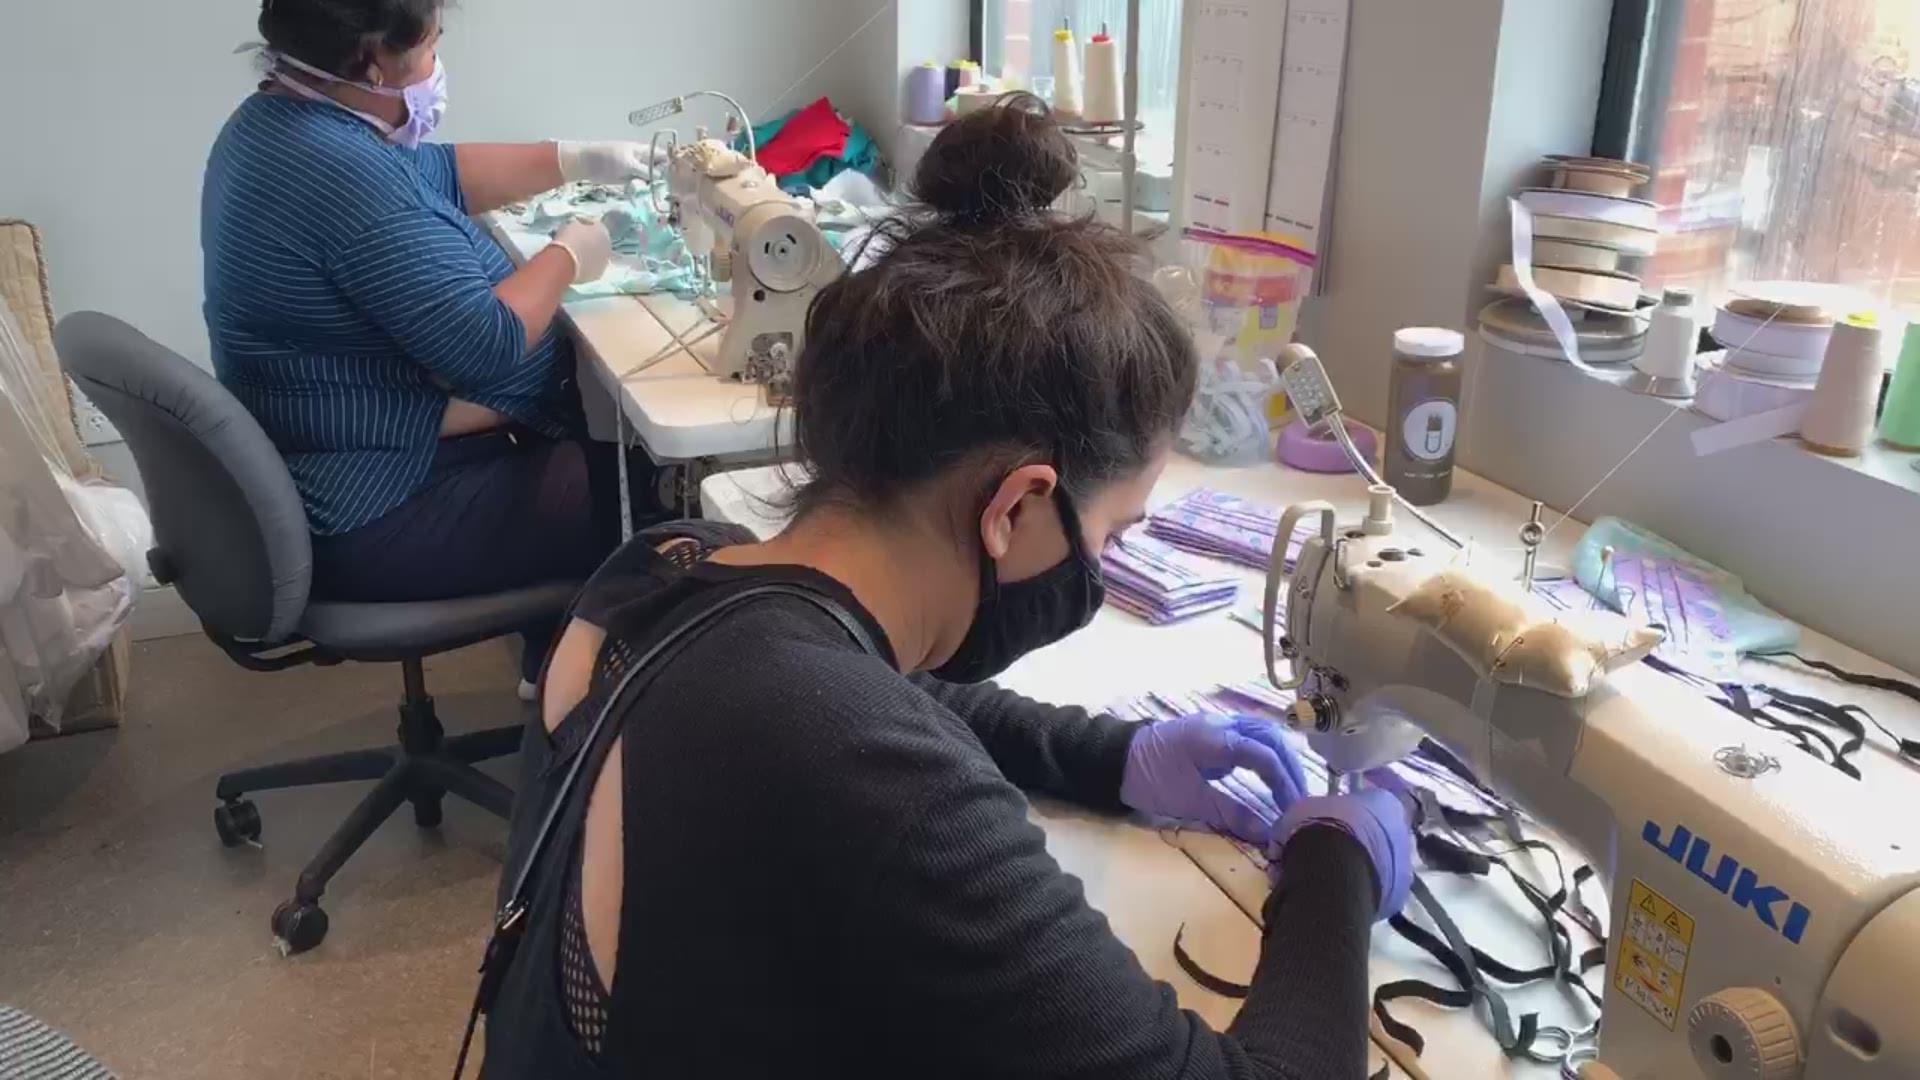 Employees with Carine's Bridal shop are sewing masks for hospital staff